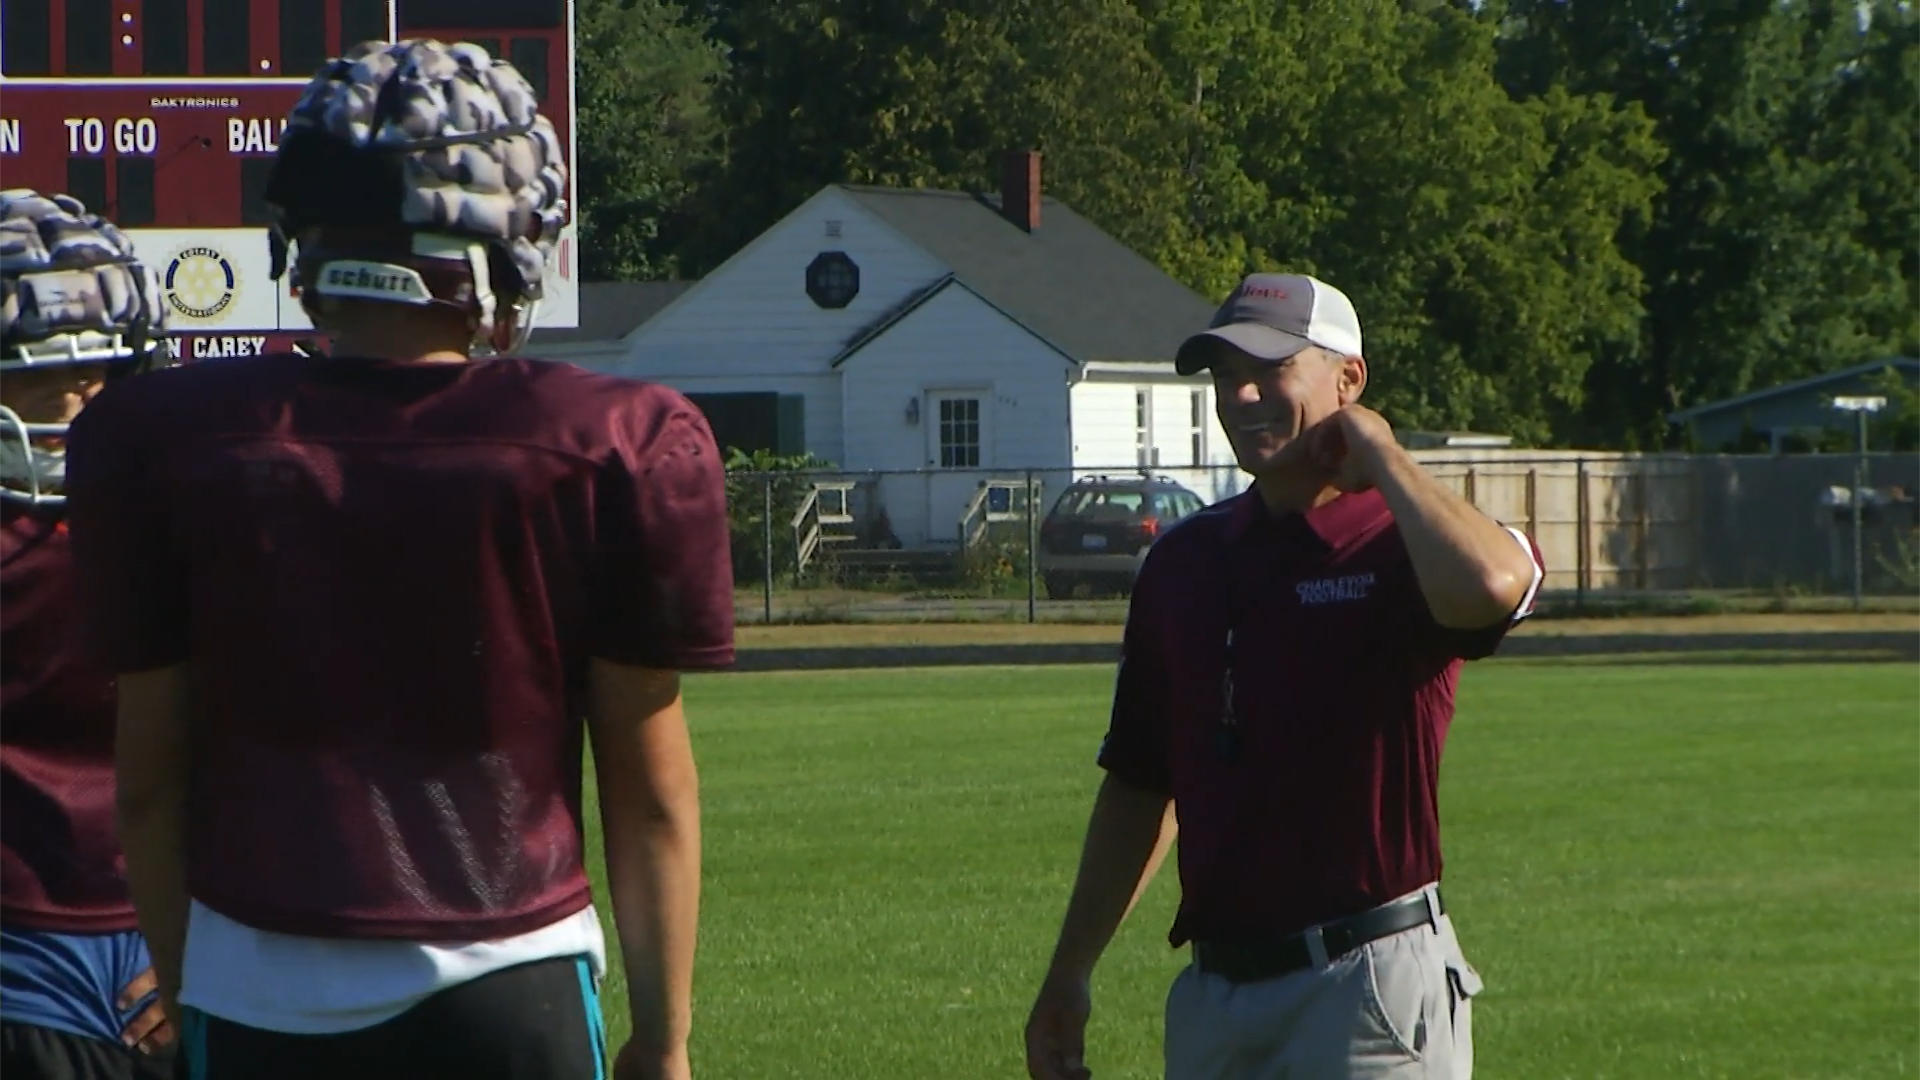 Charlevoix head coach Don Jess was selected as the week 7 Detroit Lions High School Coach of the Week.